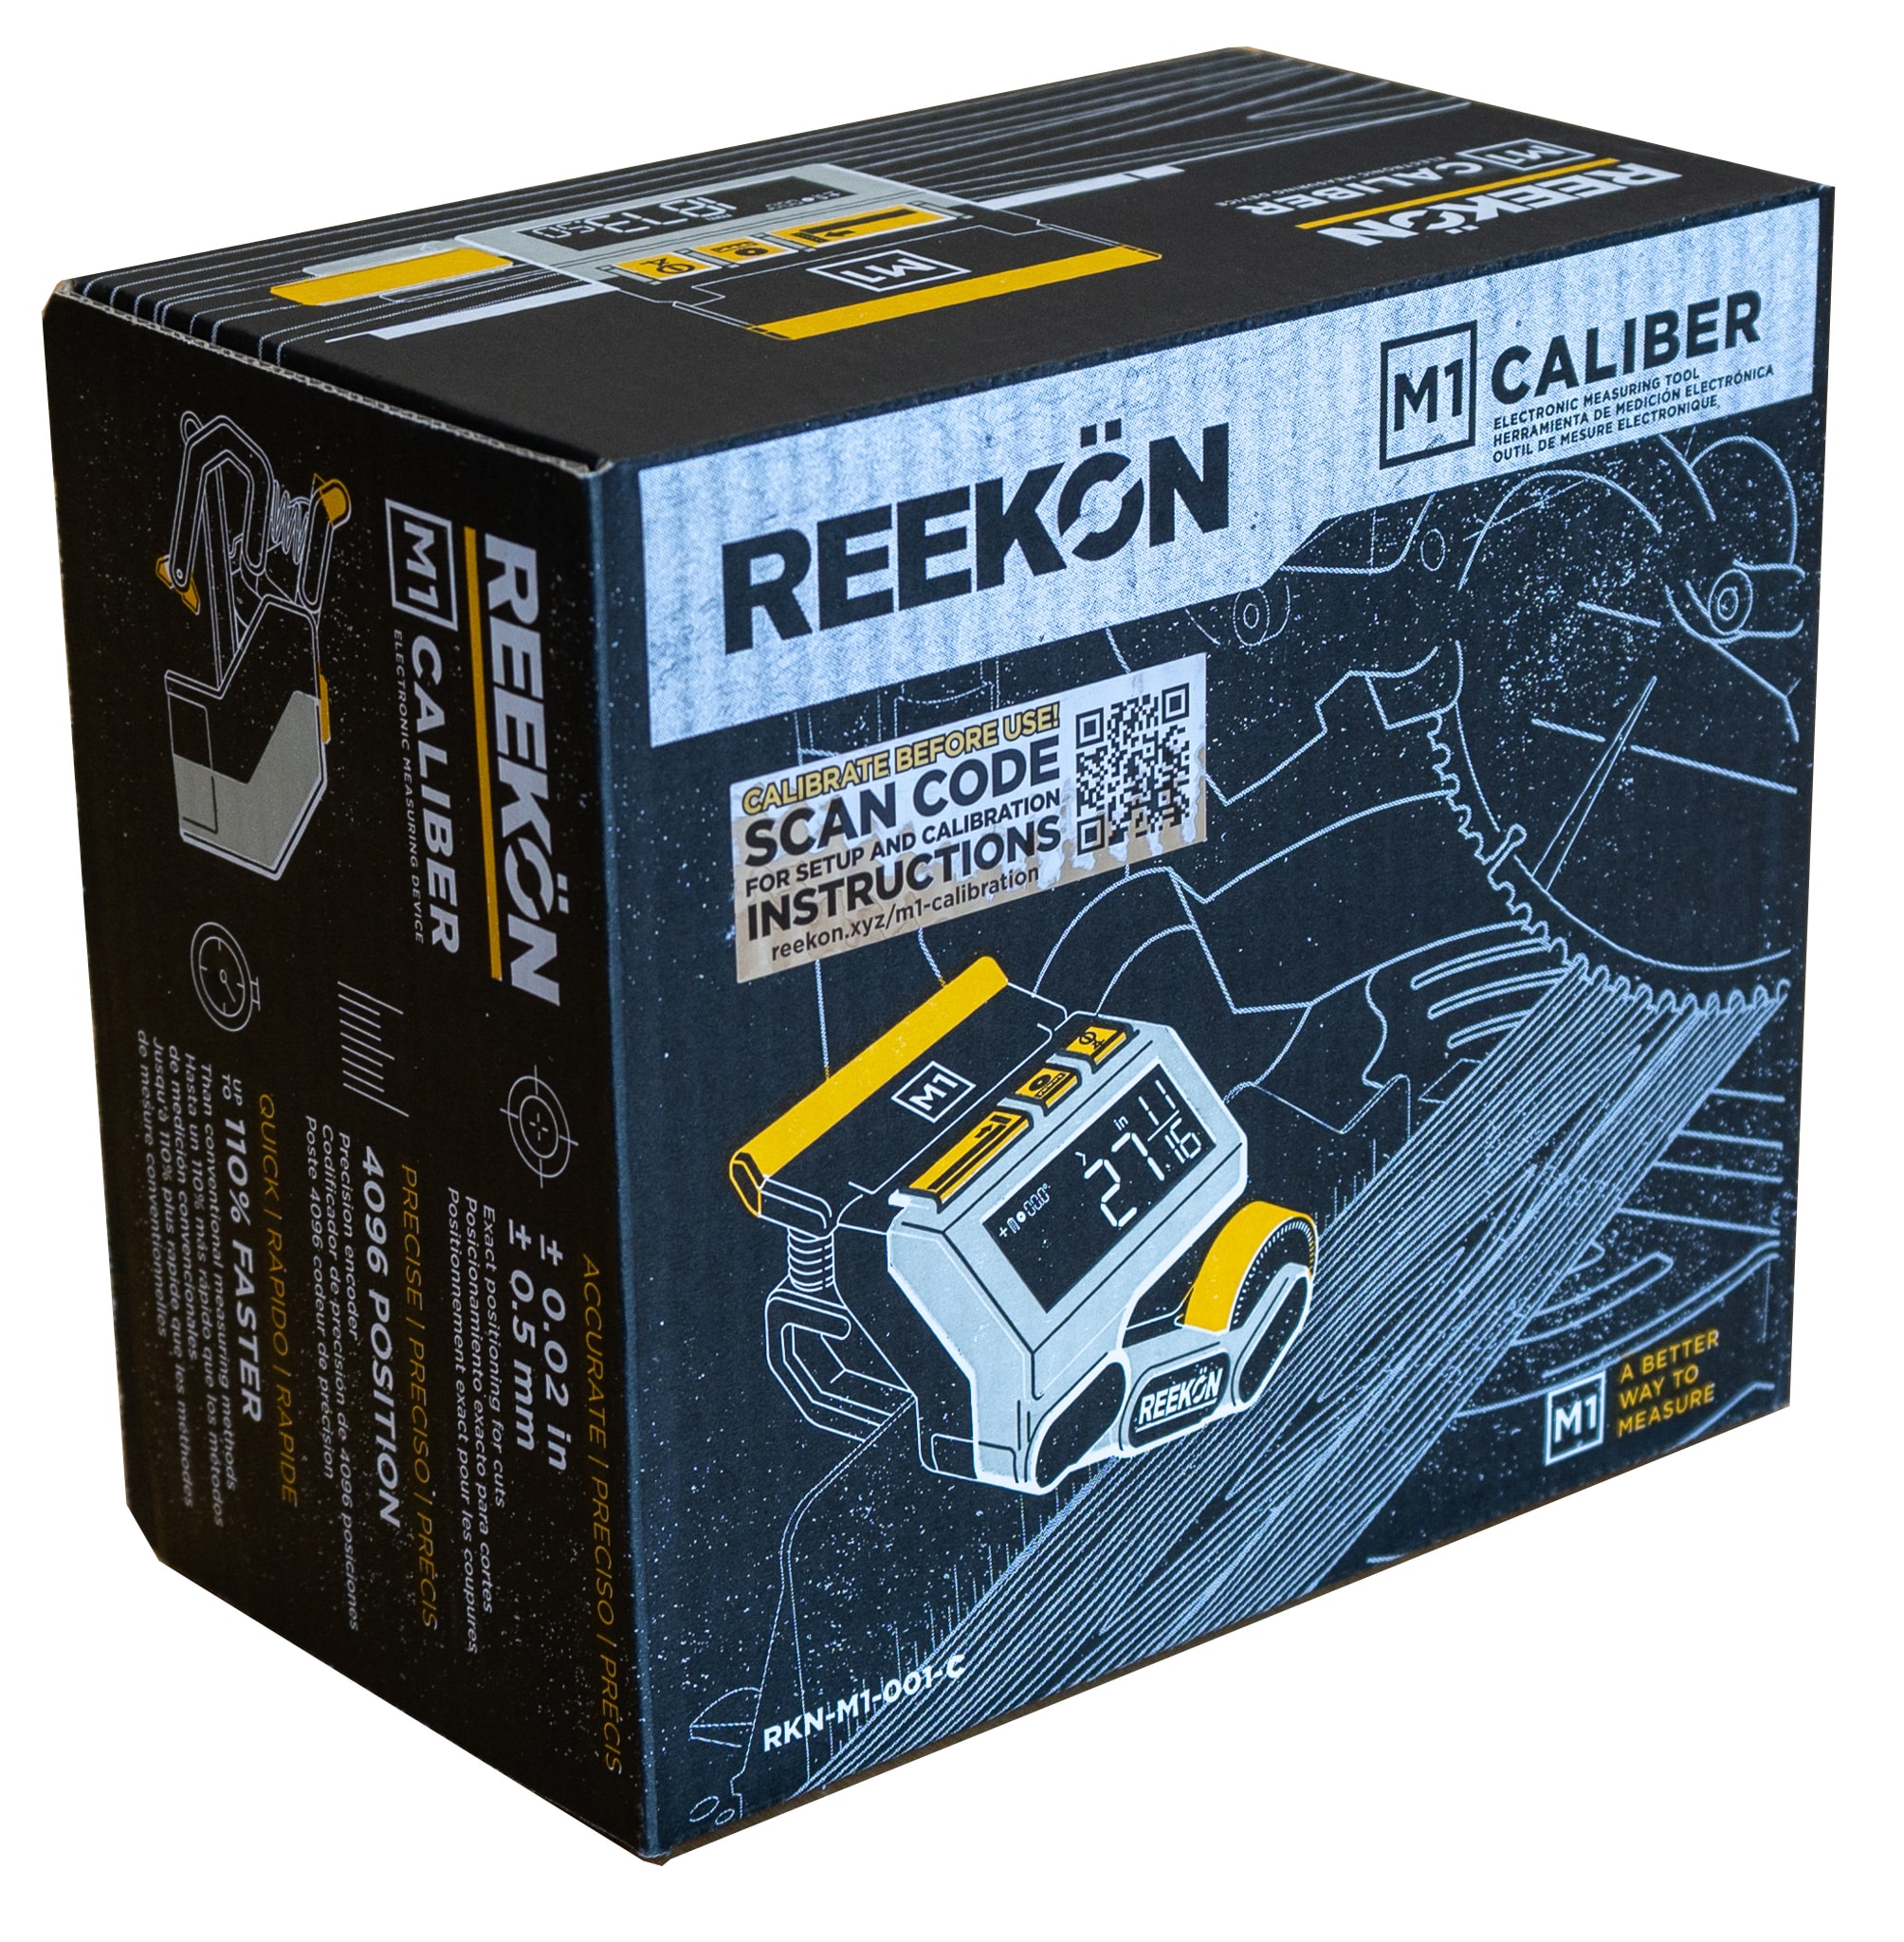 REEKON M1 Caliber Measuring Tool for Miter Saws – Faster, Safer, and Easier  Cuts, Compatible with Various Saws, Digital Display, Quick Setup